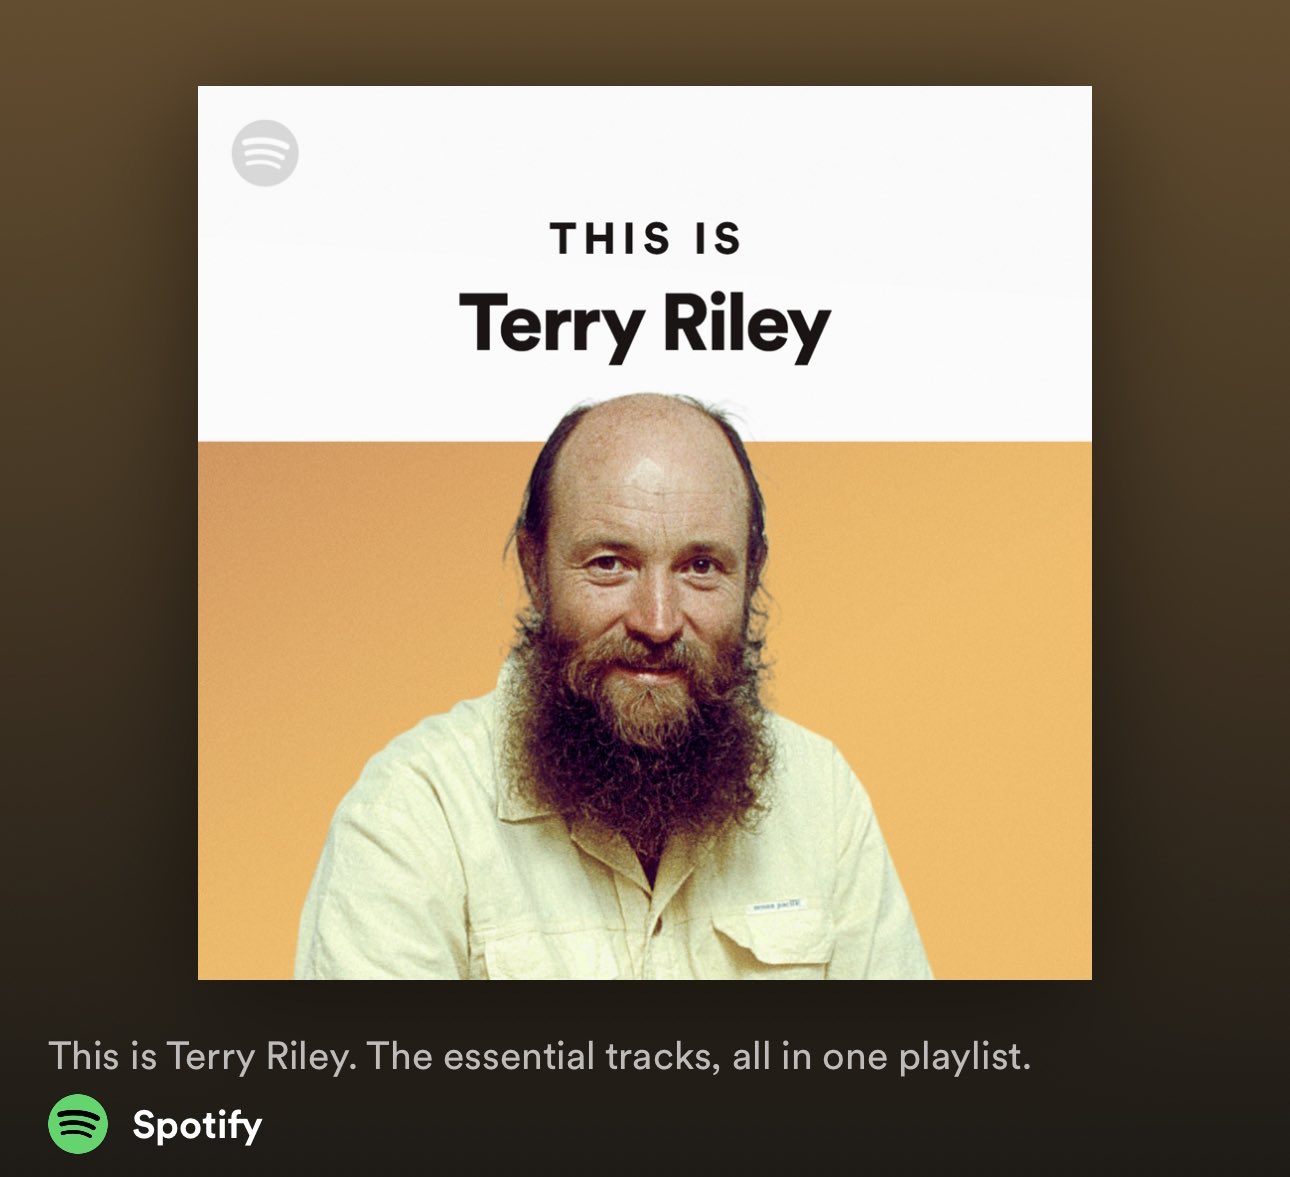 Terry Riley / テリー・ライリー (@TerryRiley_info) / Twitter